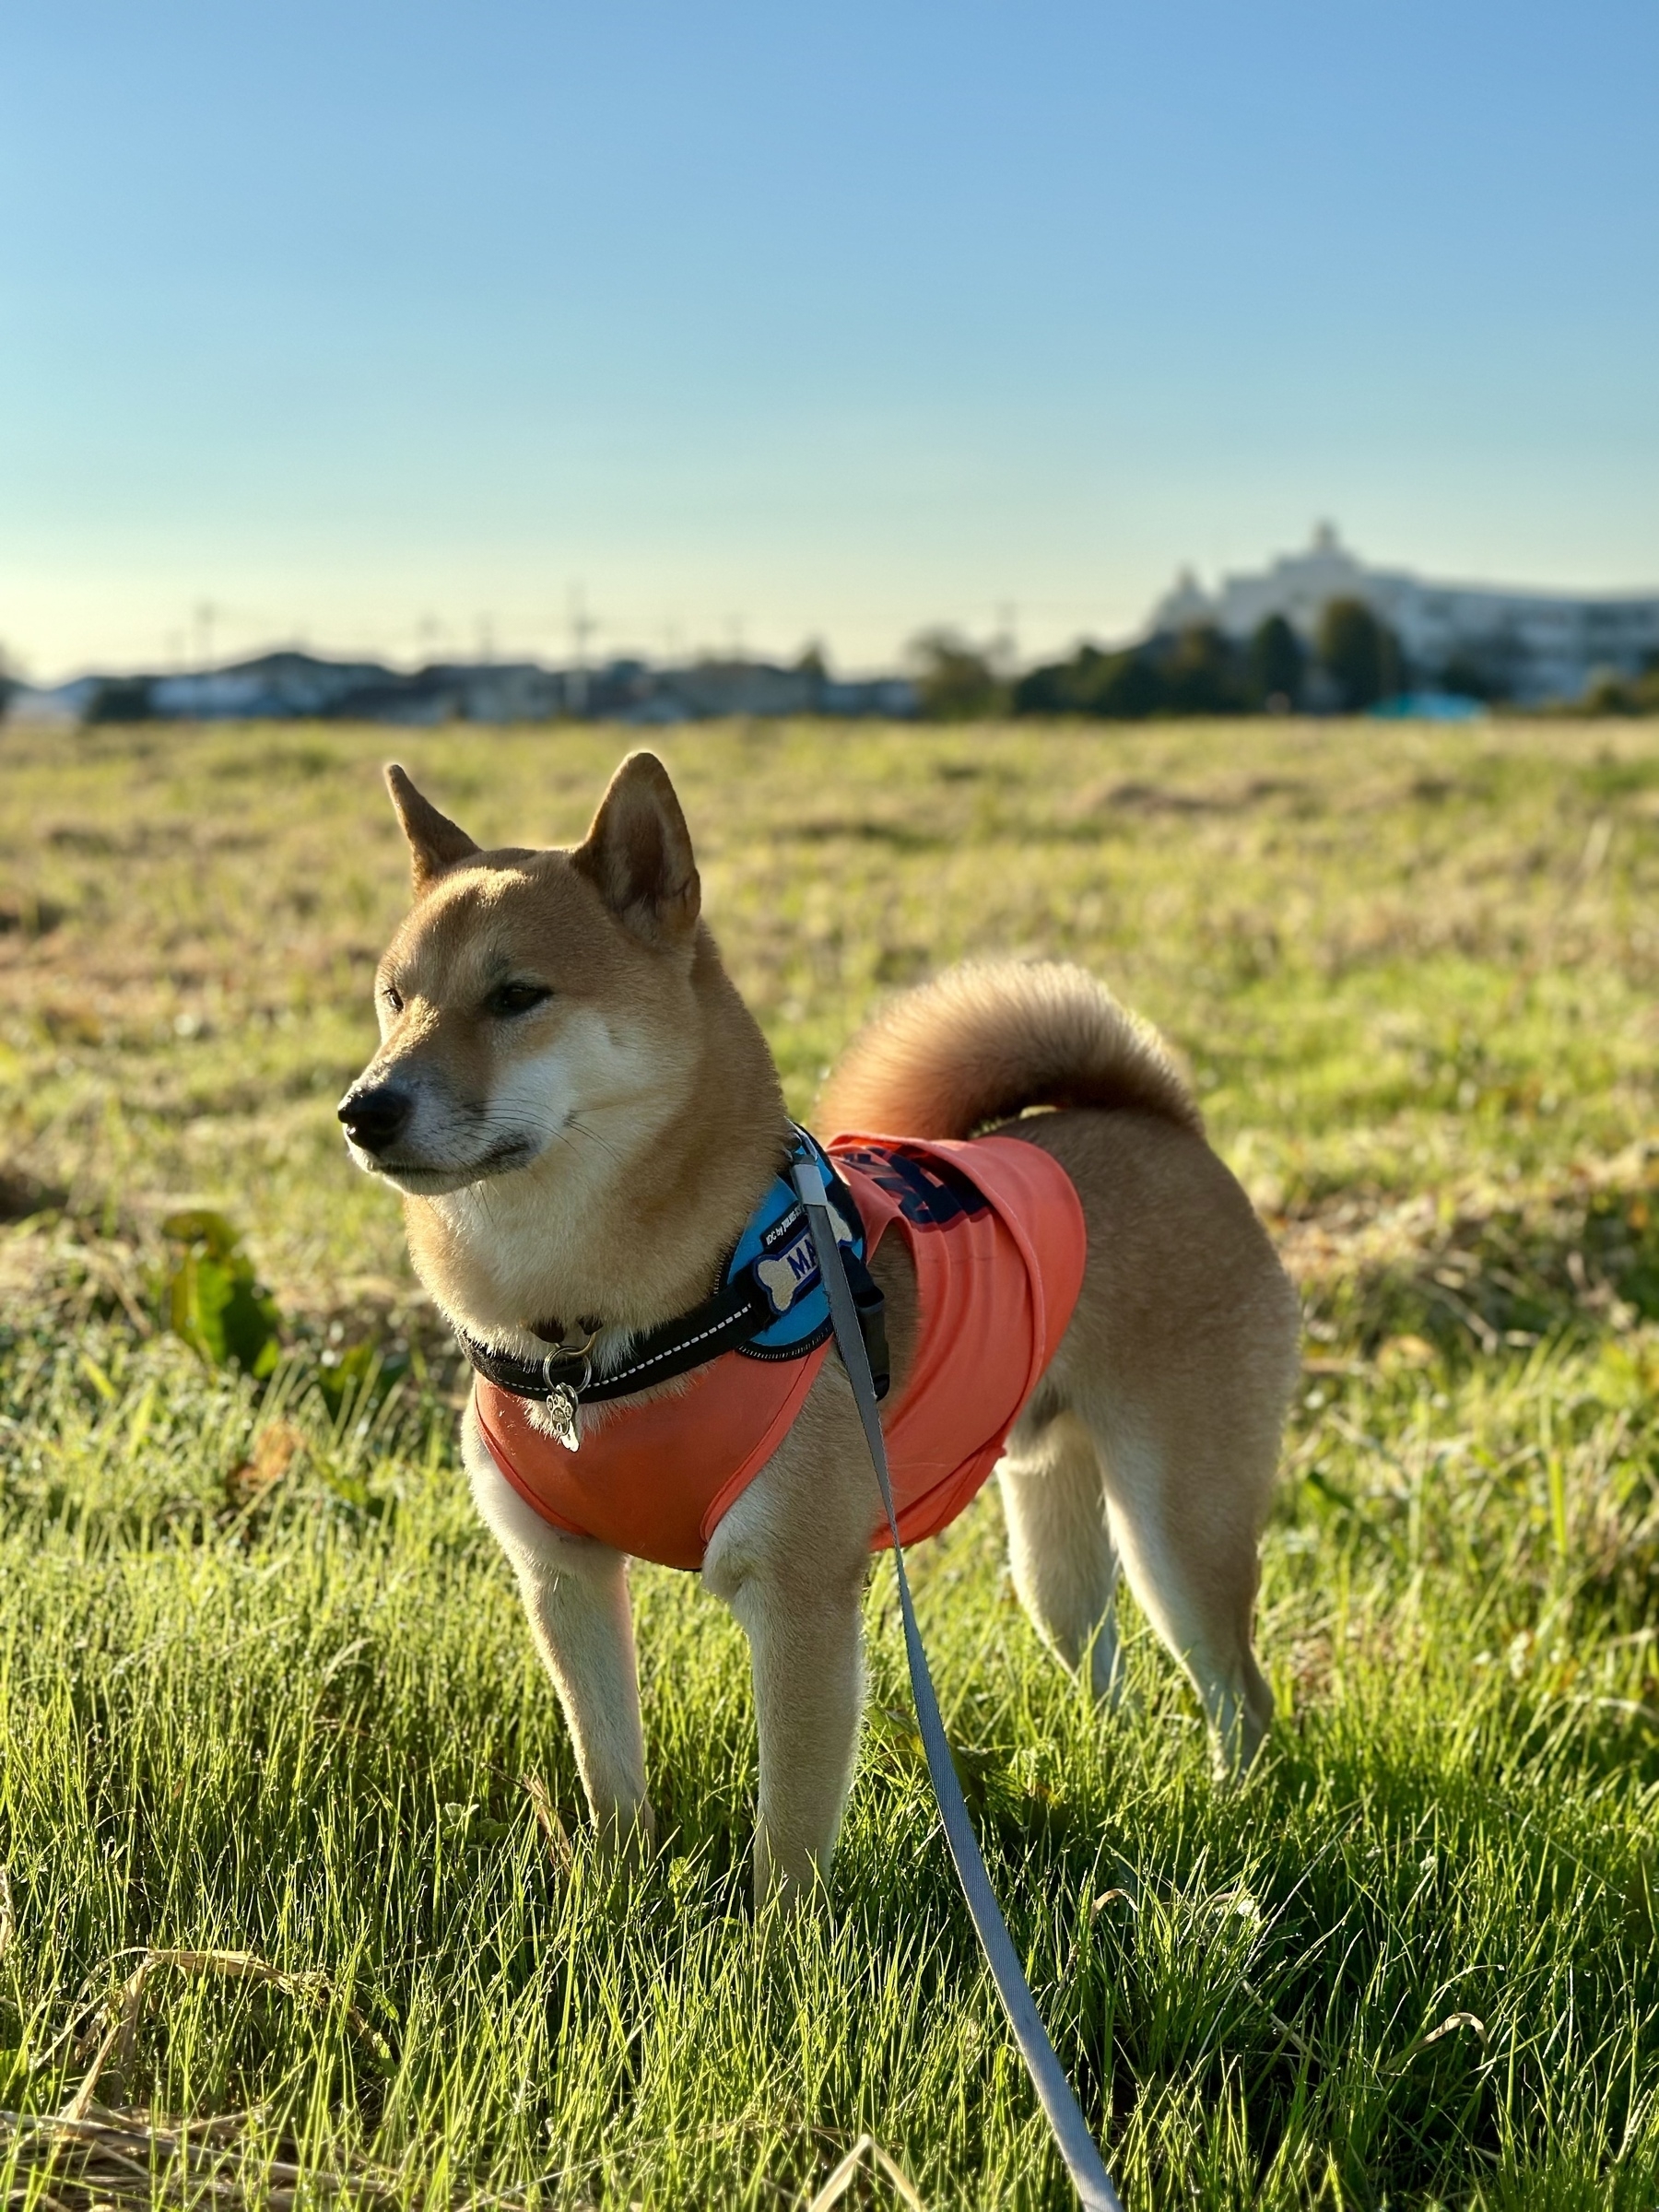 Shiba dog in an orange shirt standing in a large grassy field.